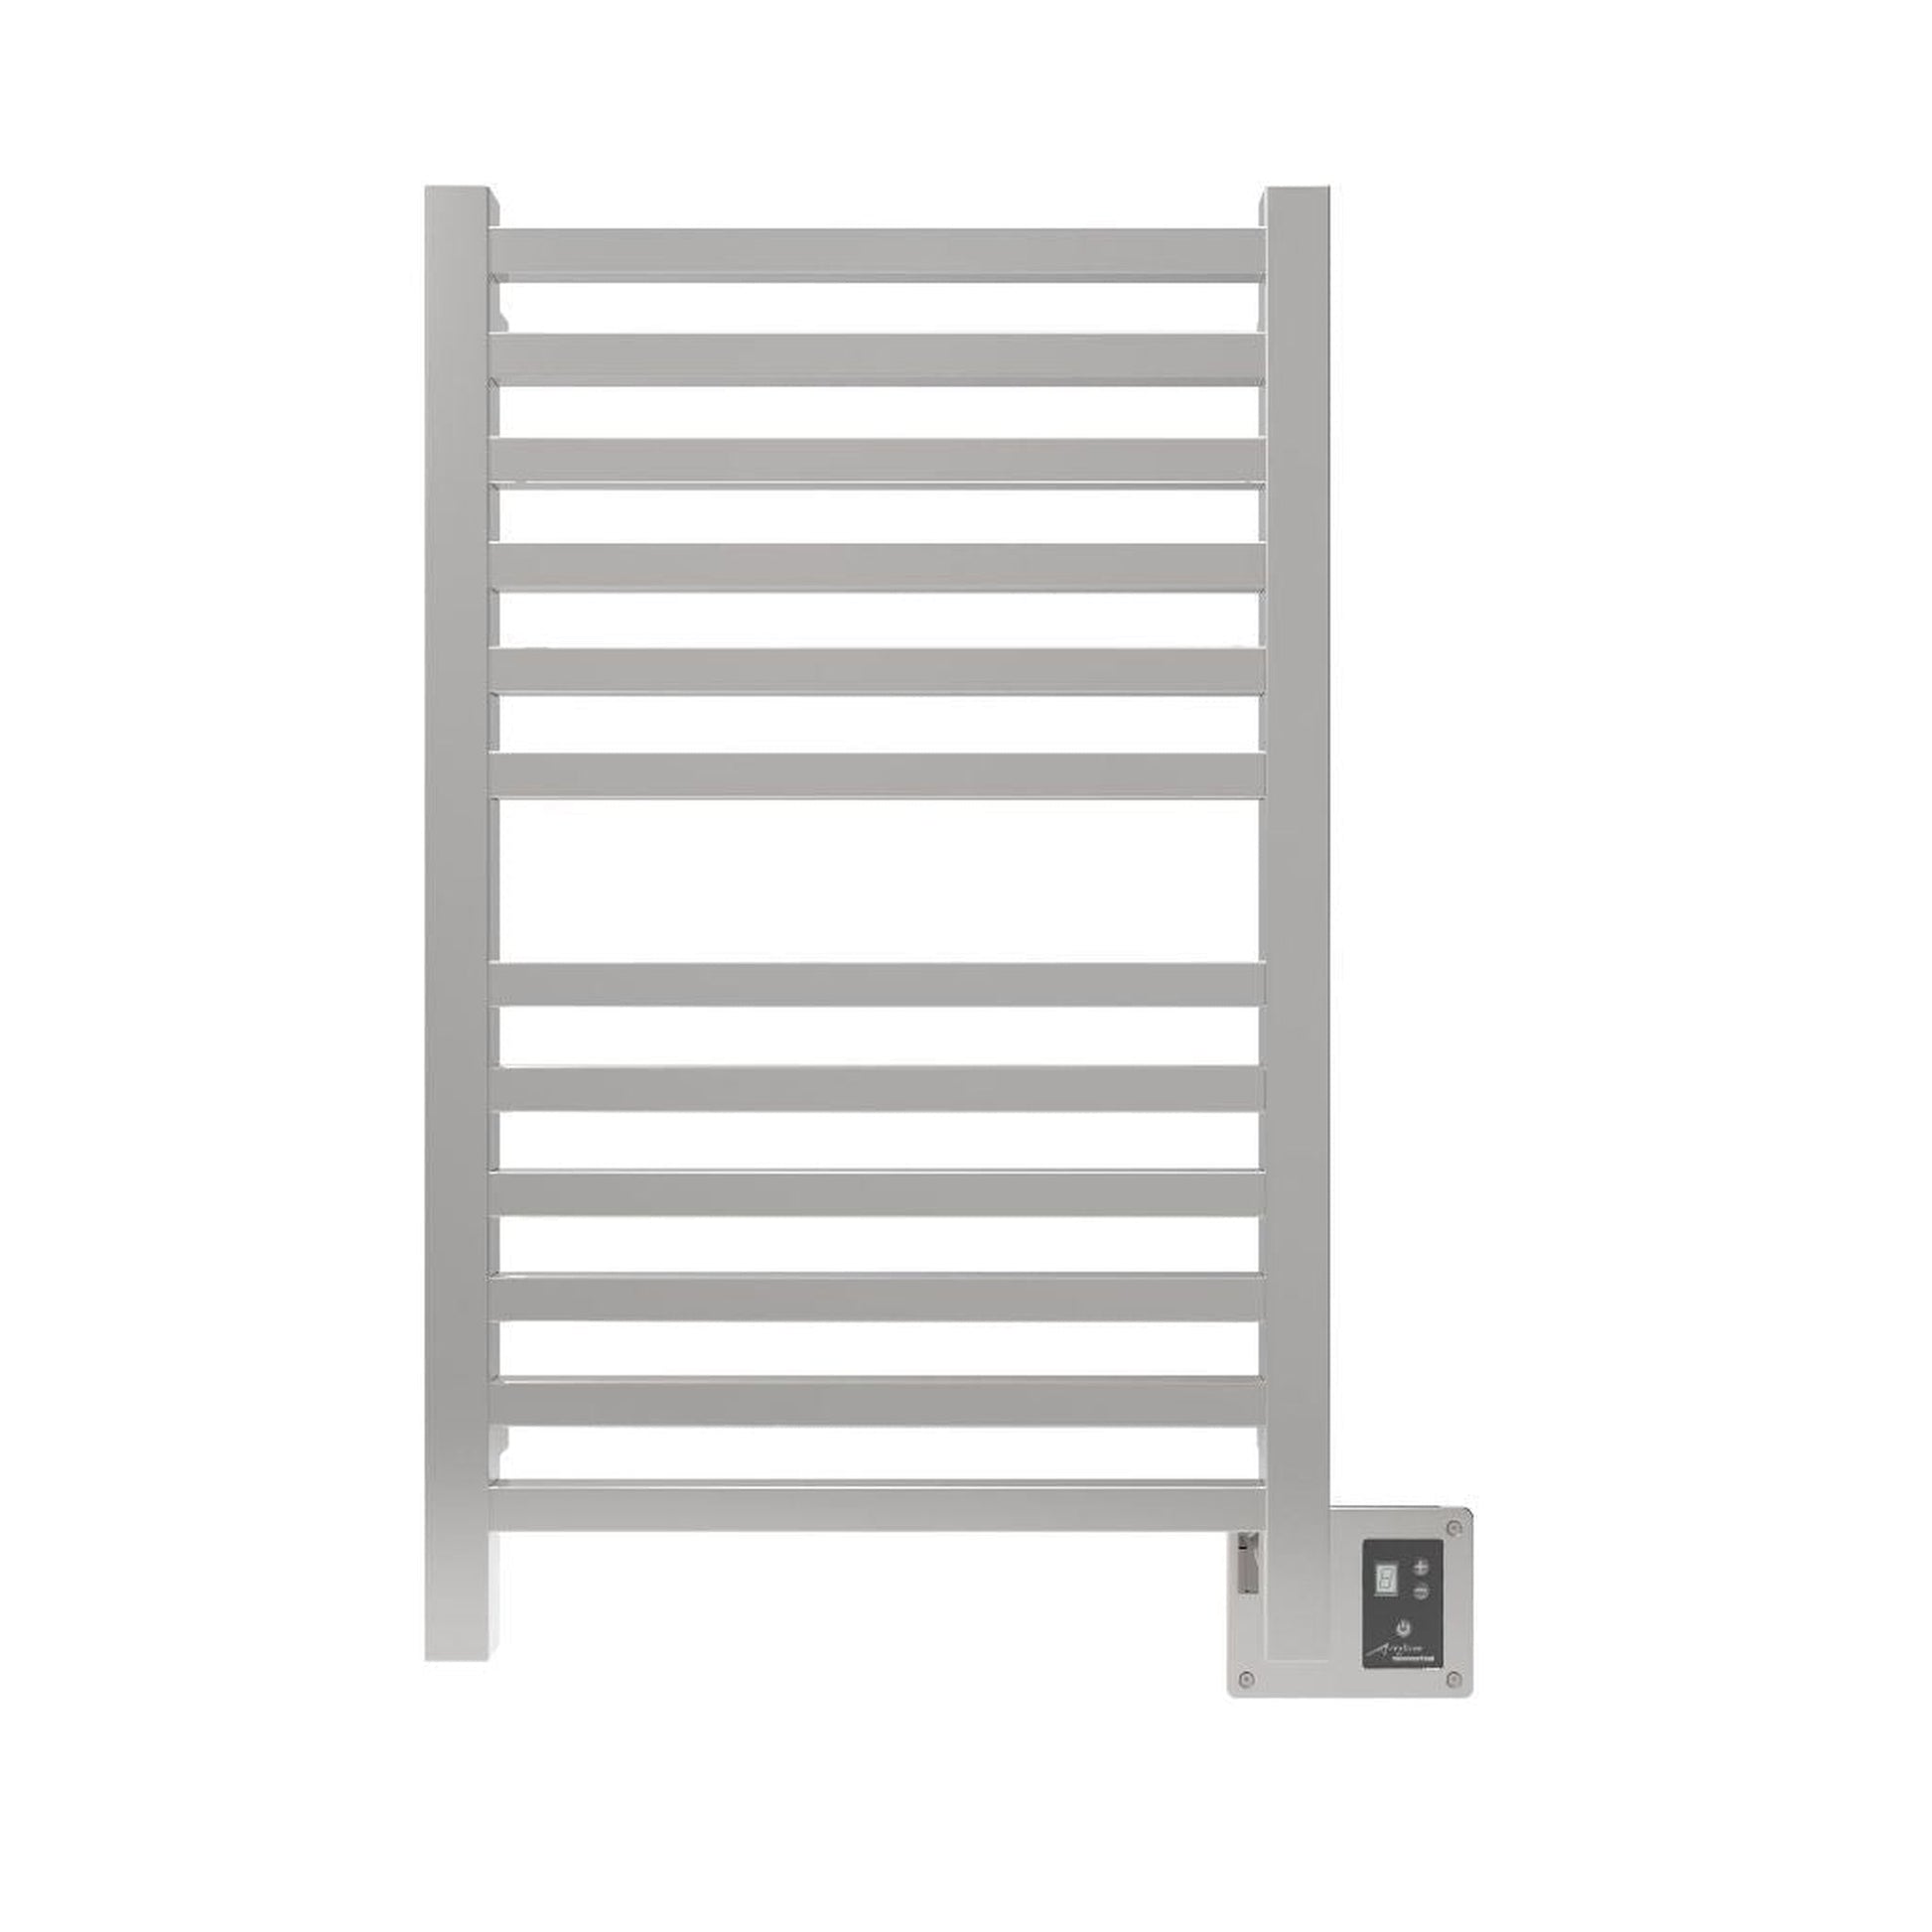 Amba Quadro 20" x 33" 12-Bar Polished Stainless Steel Hardwired Towel Warmer With Digital Heat Controller